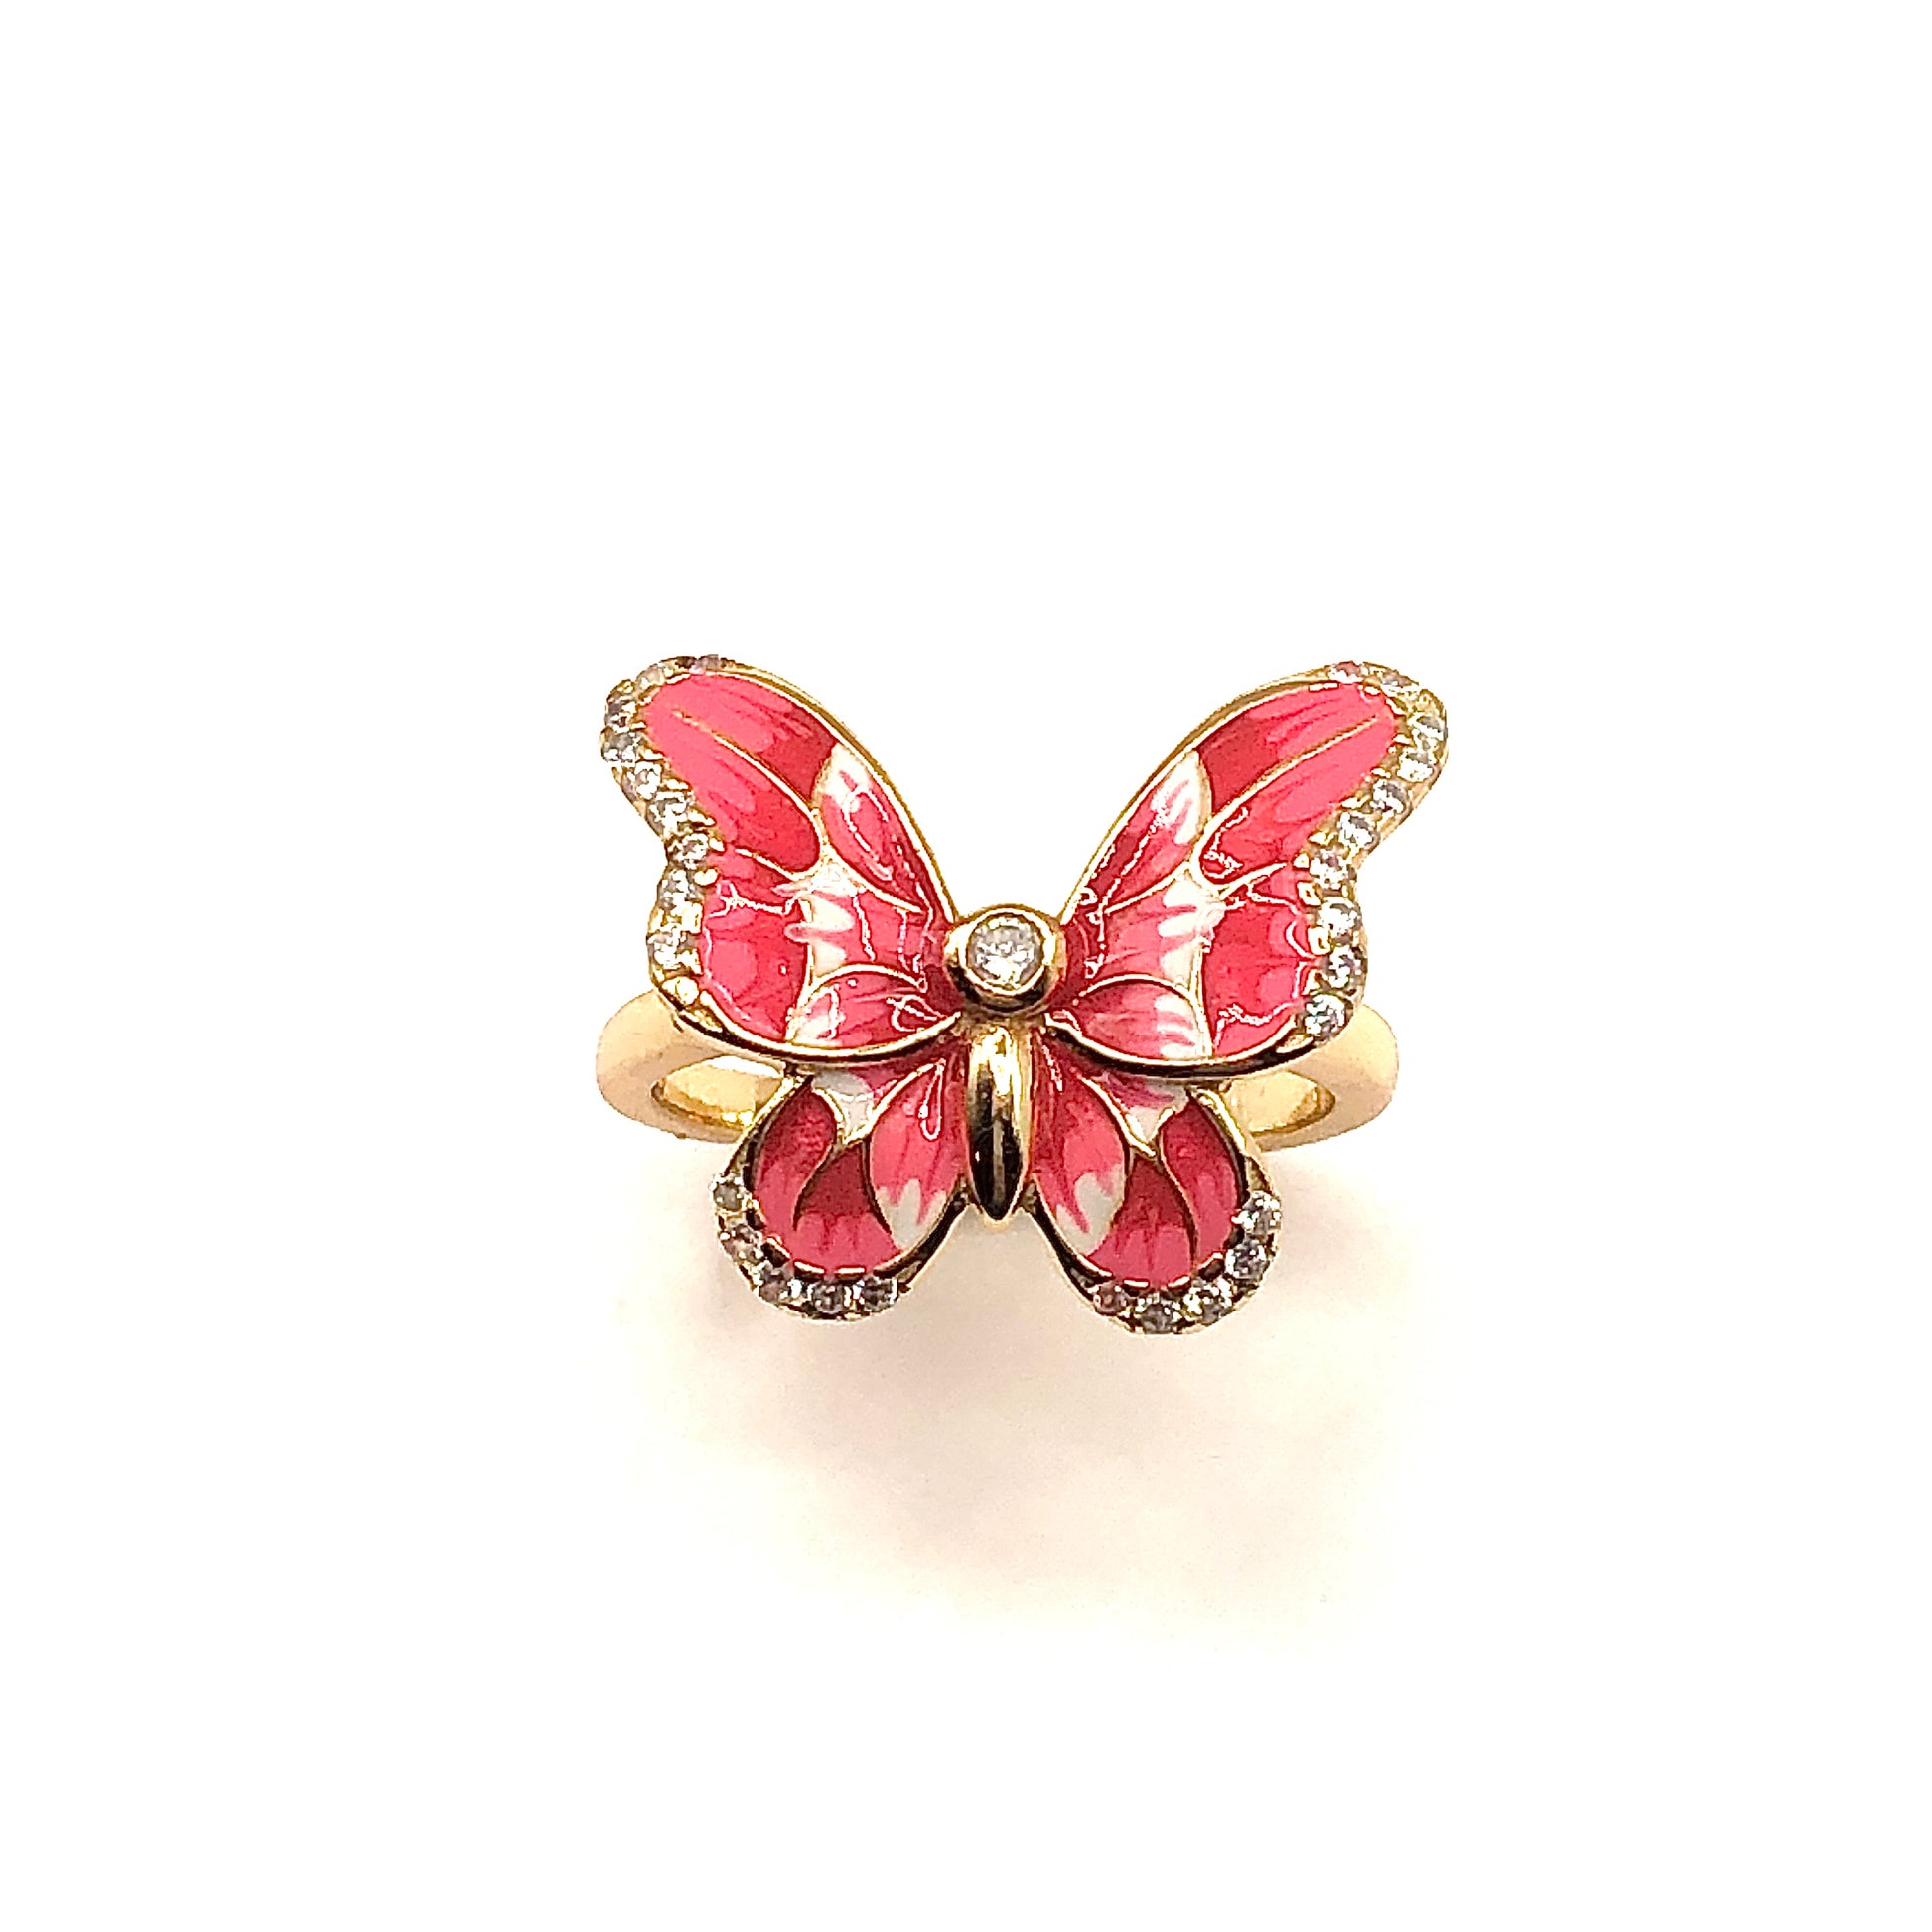 Ring - Womens Beautiful Gold Pink Butterfly Ring - Sterling Silver Stone Ring - Cocktail Ring - Statement Ring